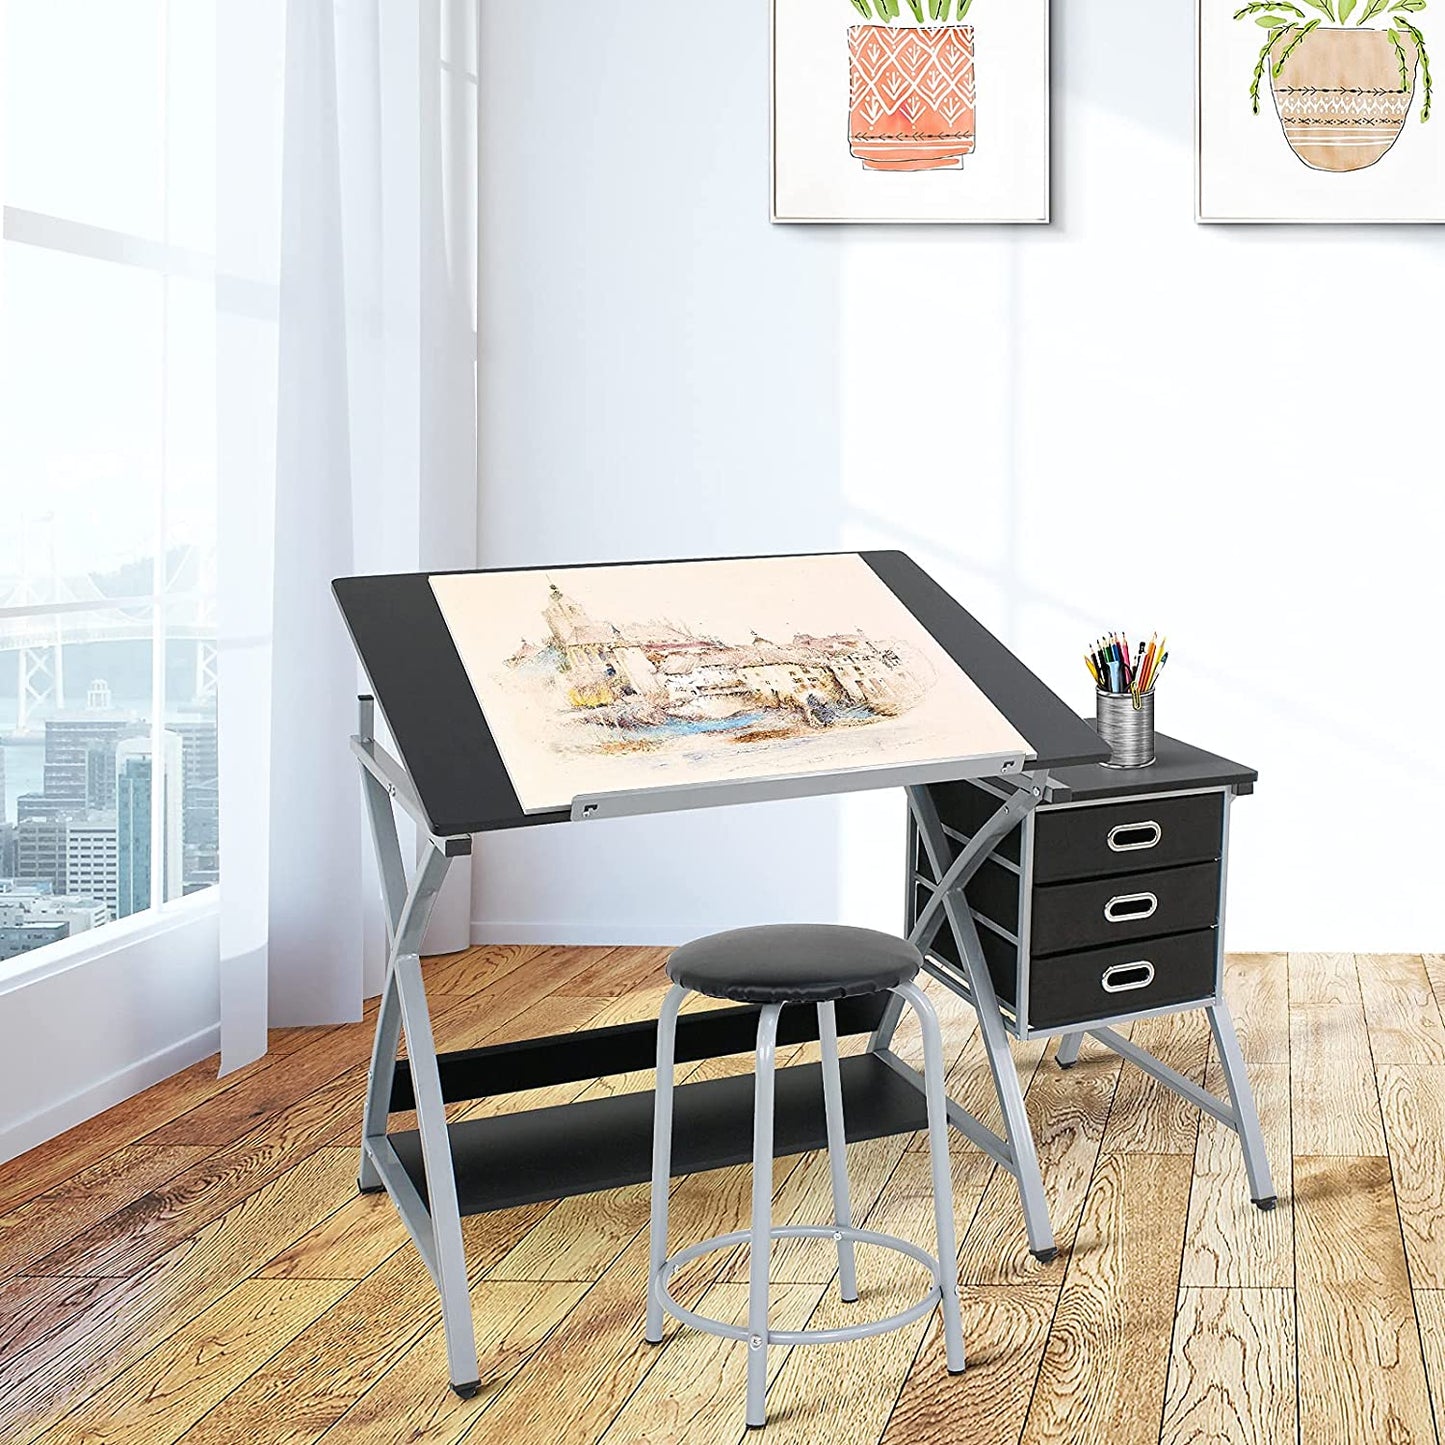 Drafting Table and Stool Set Tabletop Tilted Drawing Table Drafting Desk w/Drawers Artists Workstation, Art Craft Supplies